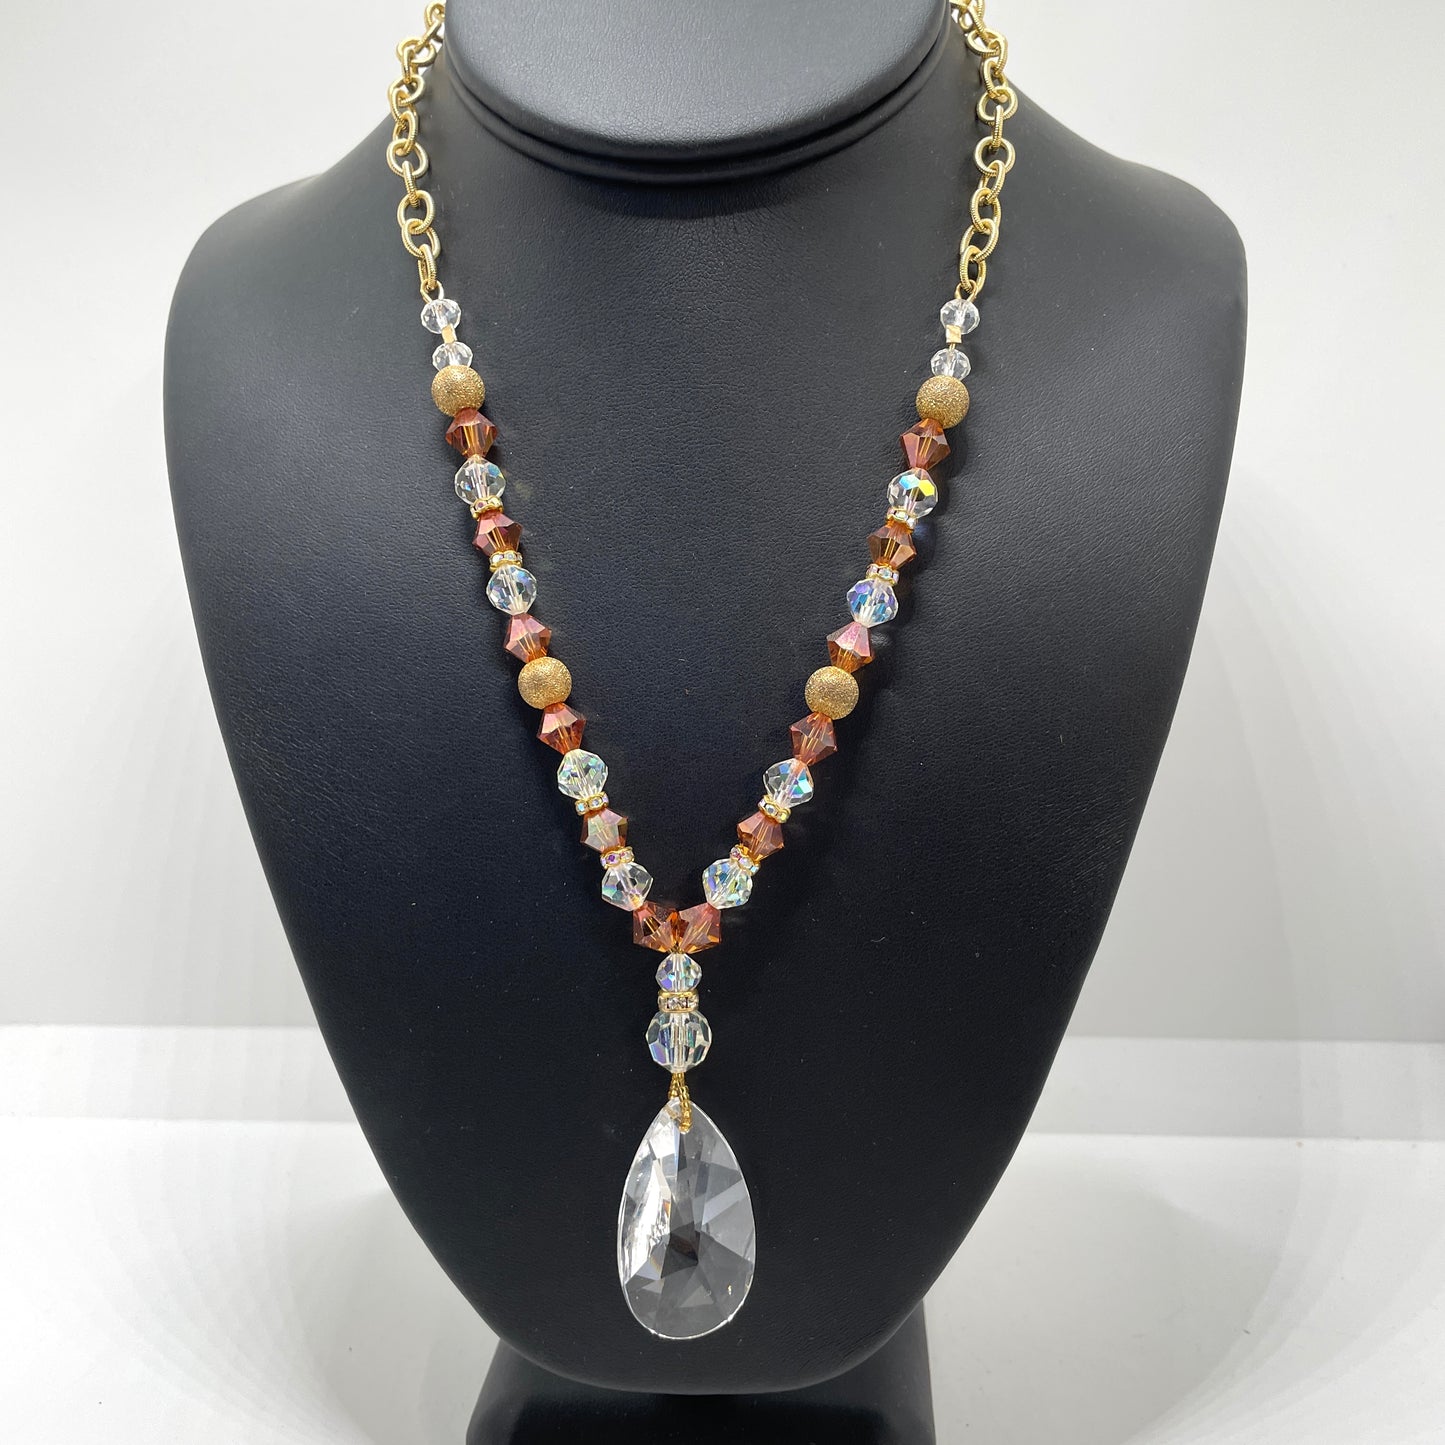 Vintage Beaded Necklace with Pendant